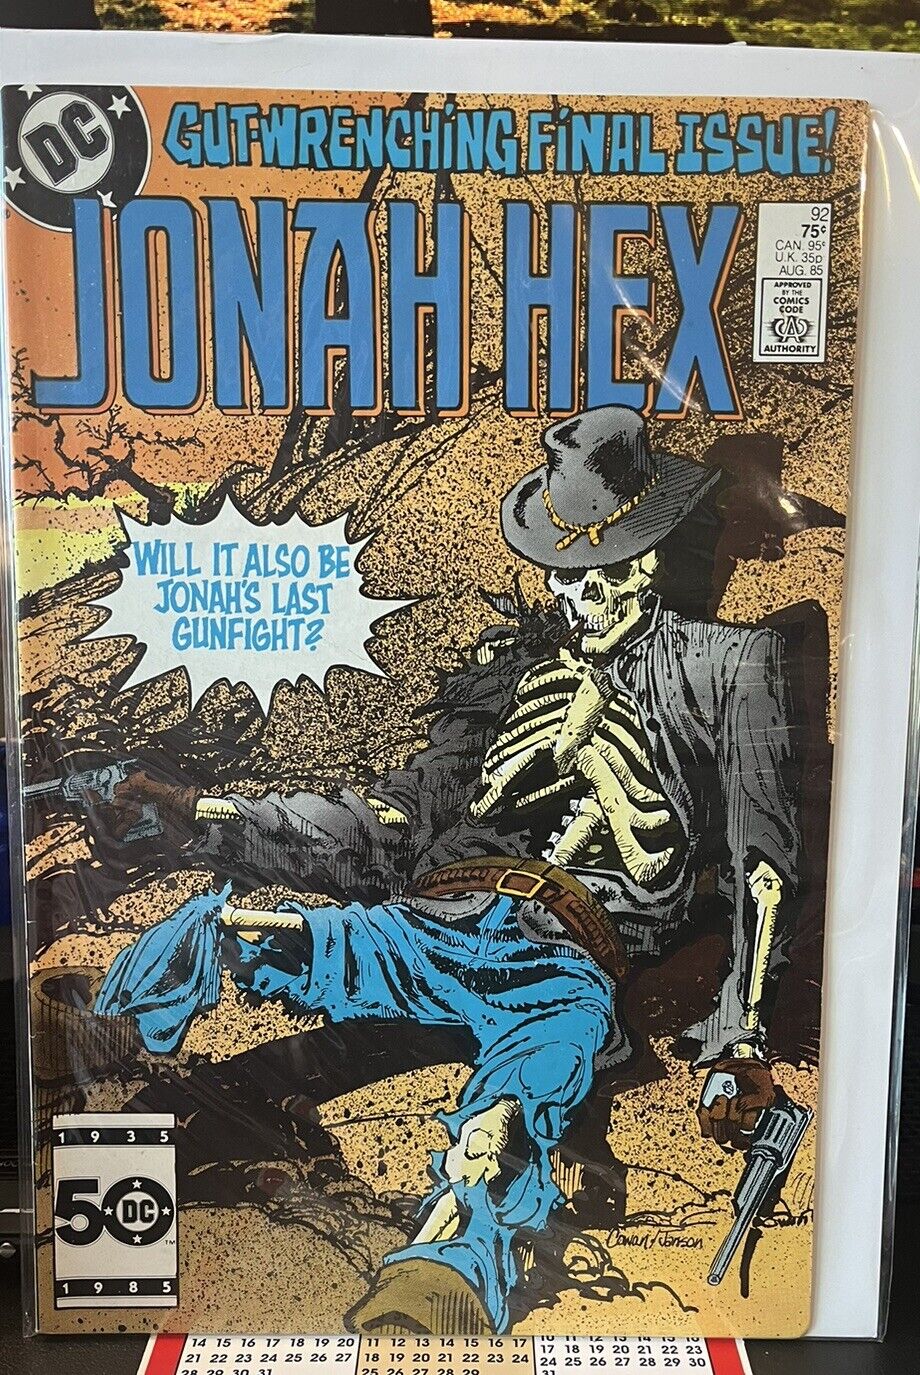 JONAH HEX #92 - CLASSIC HORROR COVER - LAST ISSUE - 1985 Hard To Find